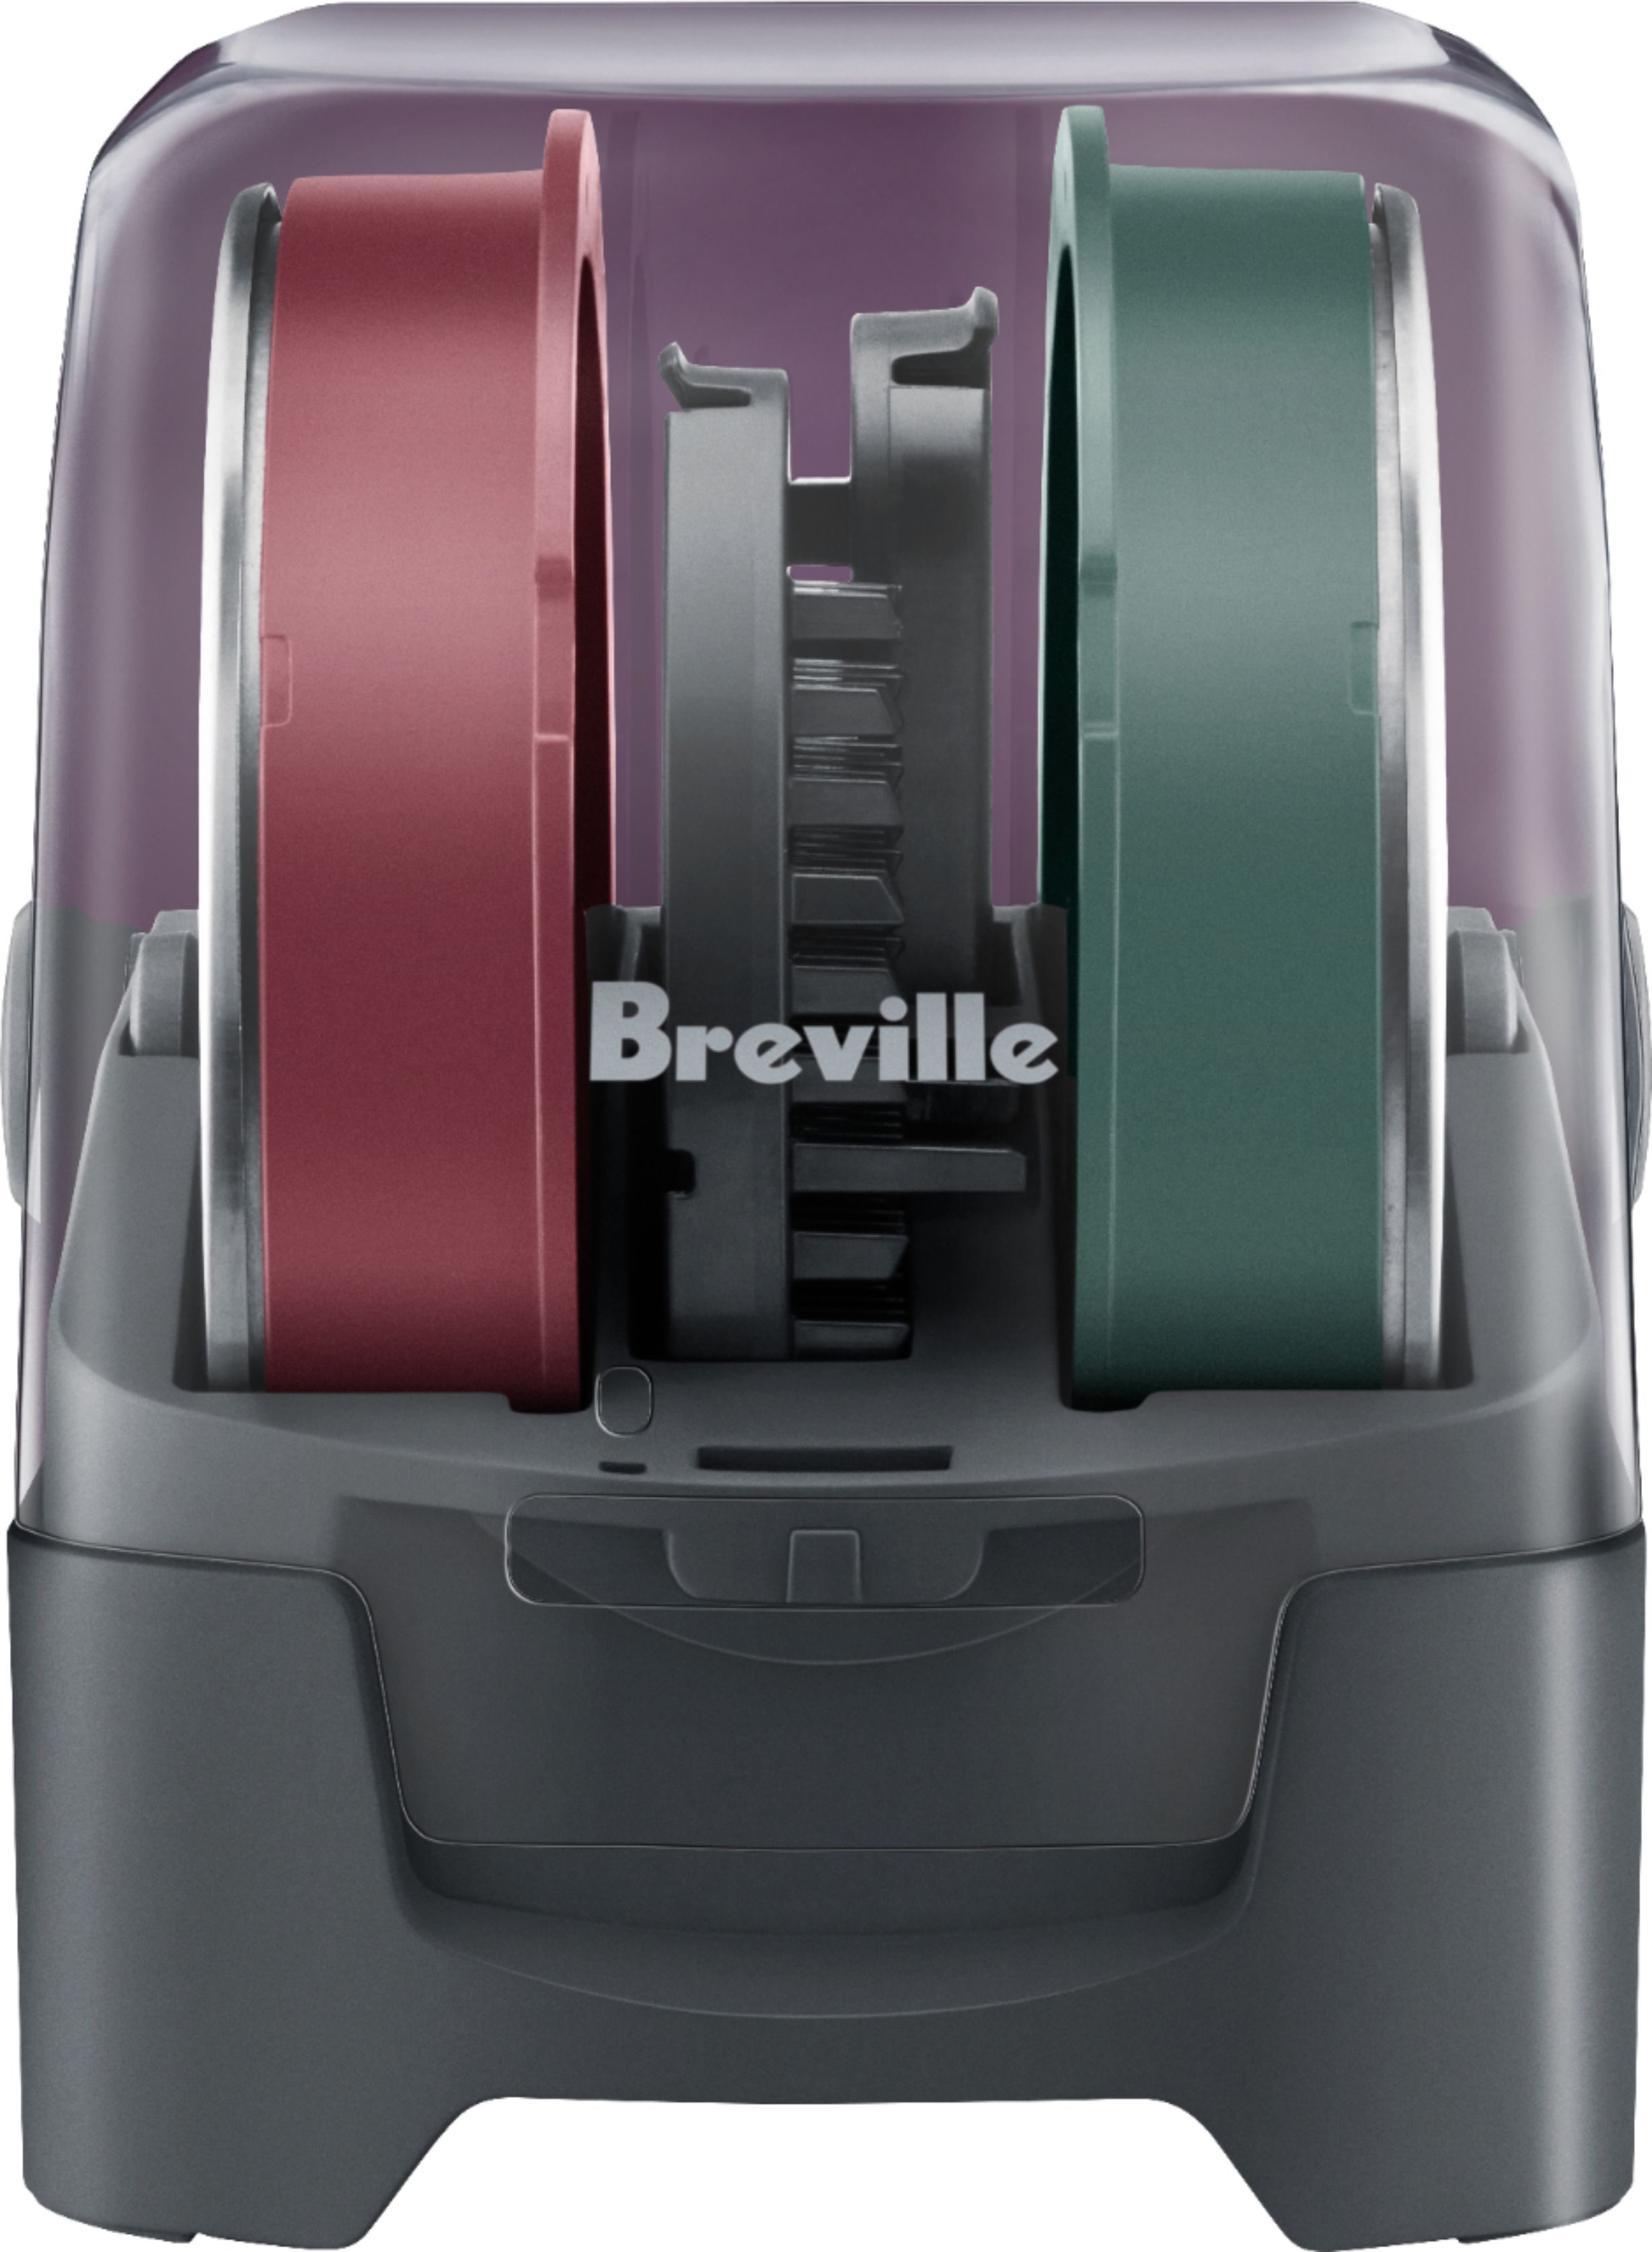 Breville Sous Chef Peel & Dice Food Processor Review